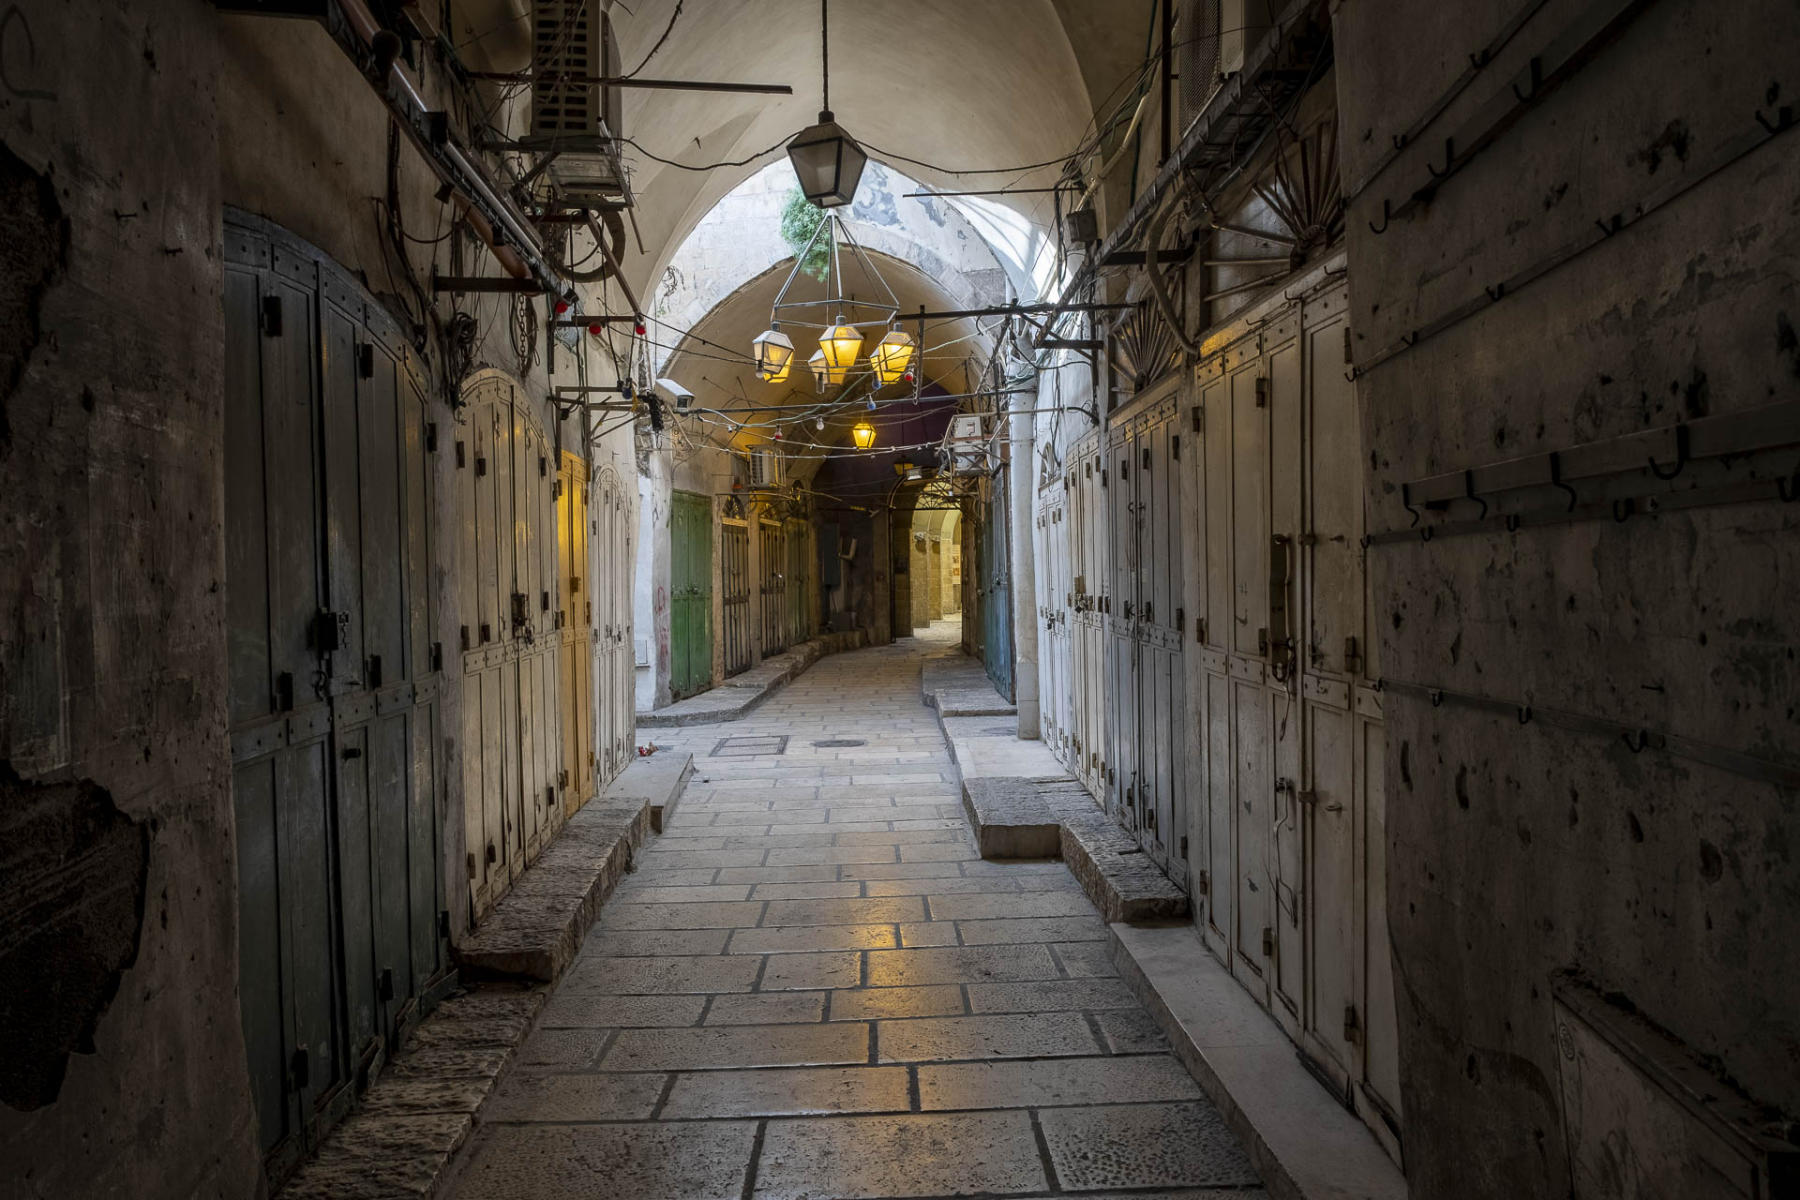  : Lockdown in the Holy City : Richard Dweck